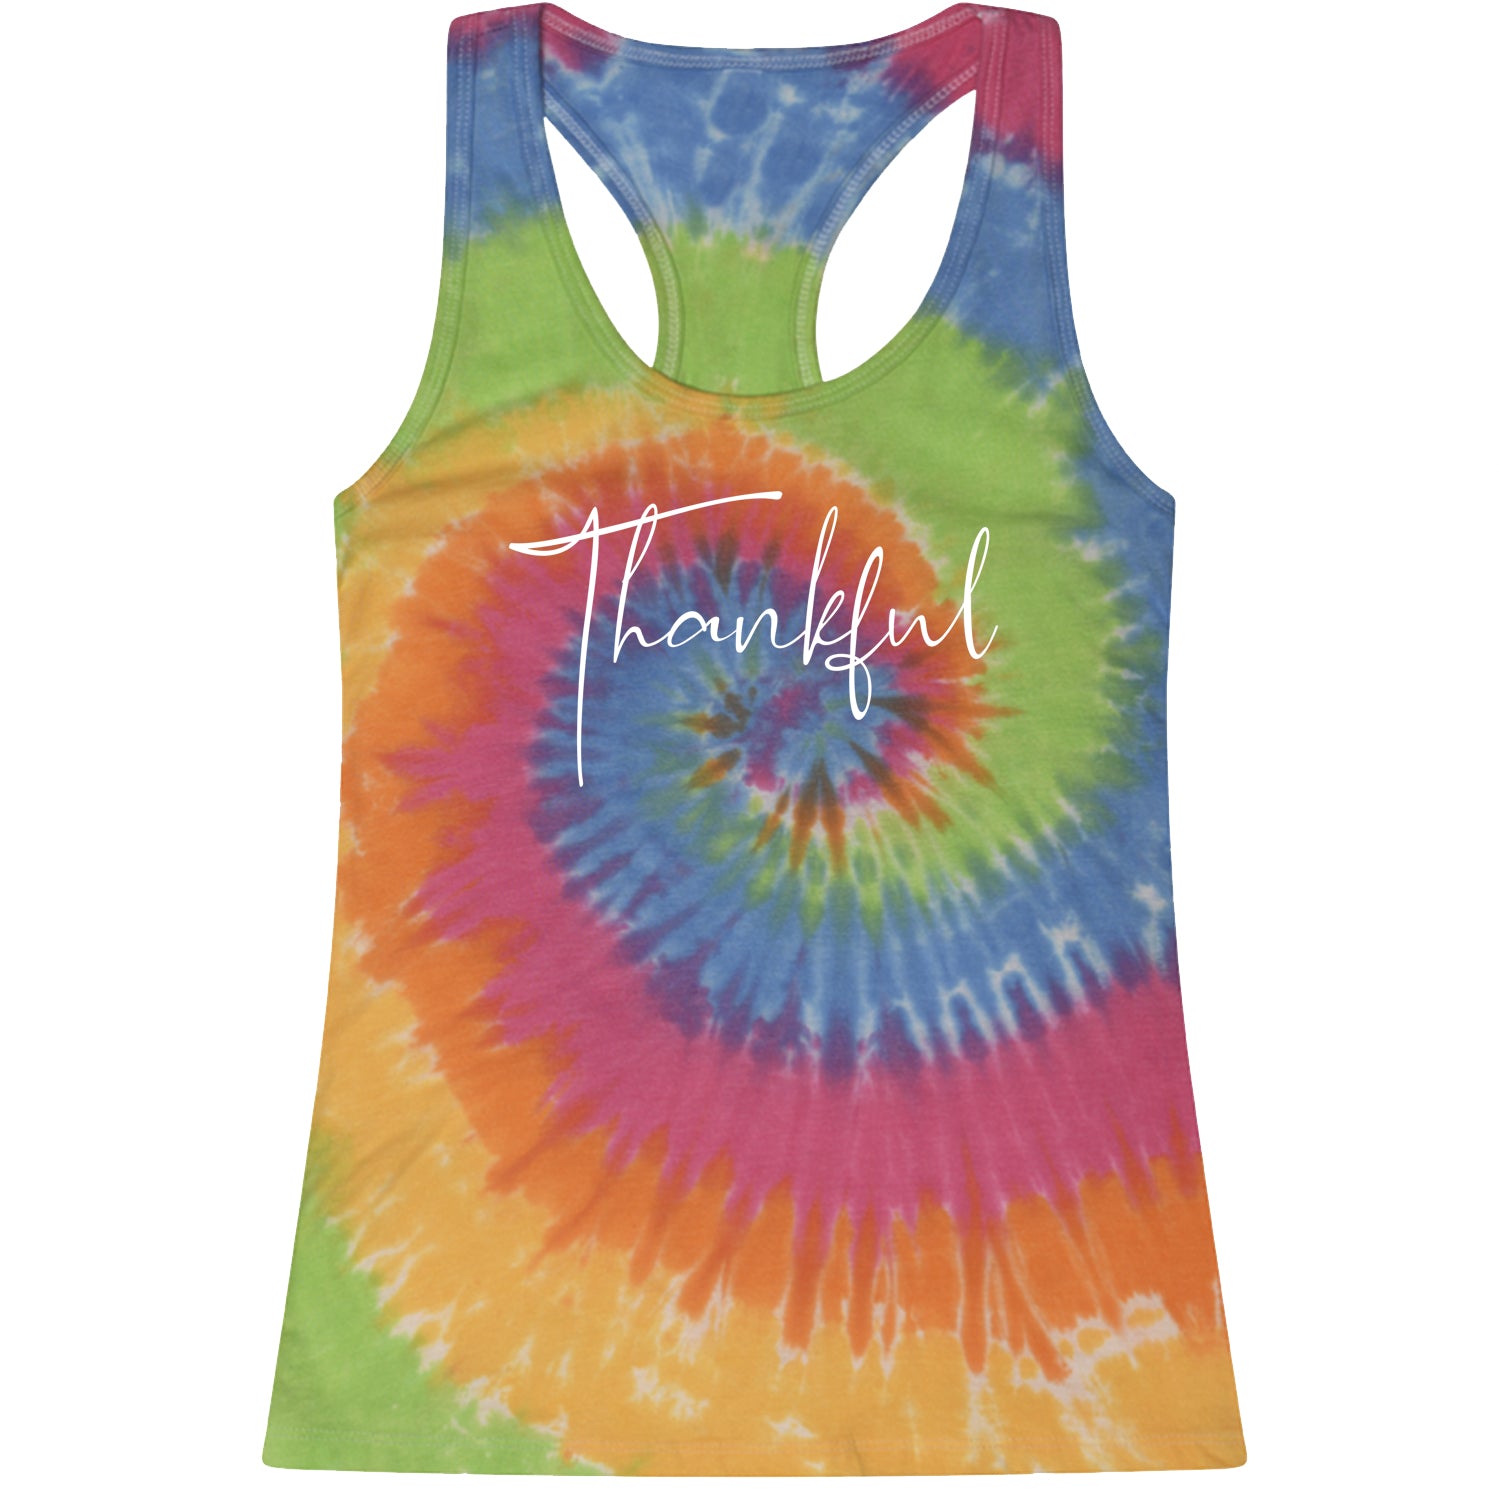 Thankful Racerback Tank Top for Women thanksgiving by Expression Tees